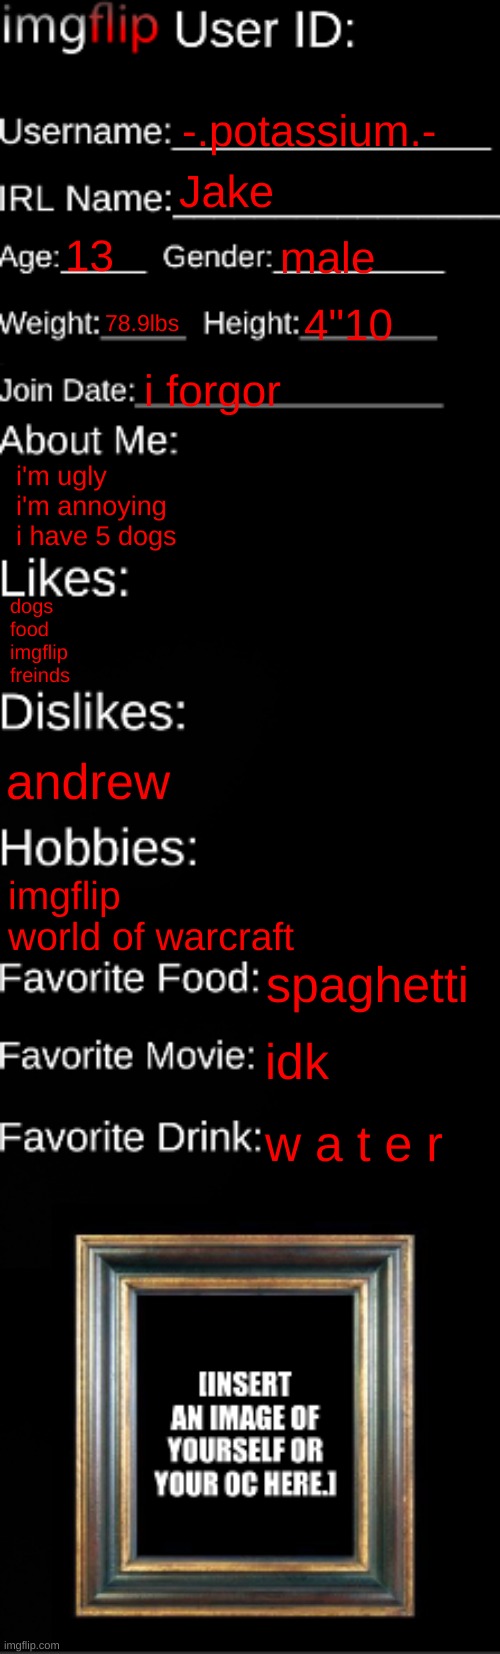 imgflip ID Card | -.potassium.-; Jake; 13; male; 78.9lbs; 4"10; i forgor; i'm ugly
i'm annoying
i have 5 dogs; dogs
food
imgflip
freinds; andrew; imgflip
world of warcraft; spaghetti; idk; w a t e r | image tagged in imgflip id card | made w/ Imgflip meme maker